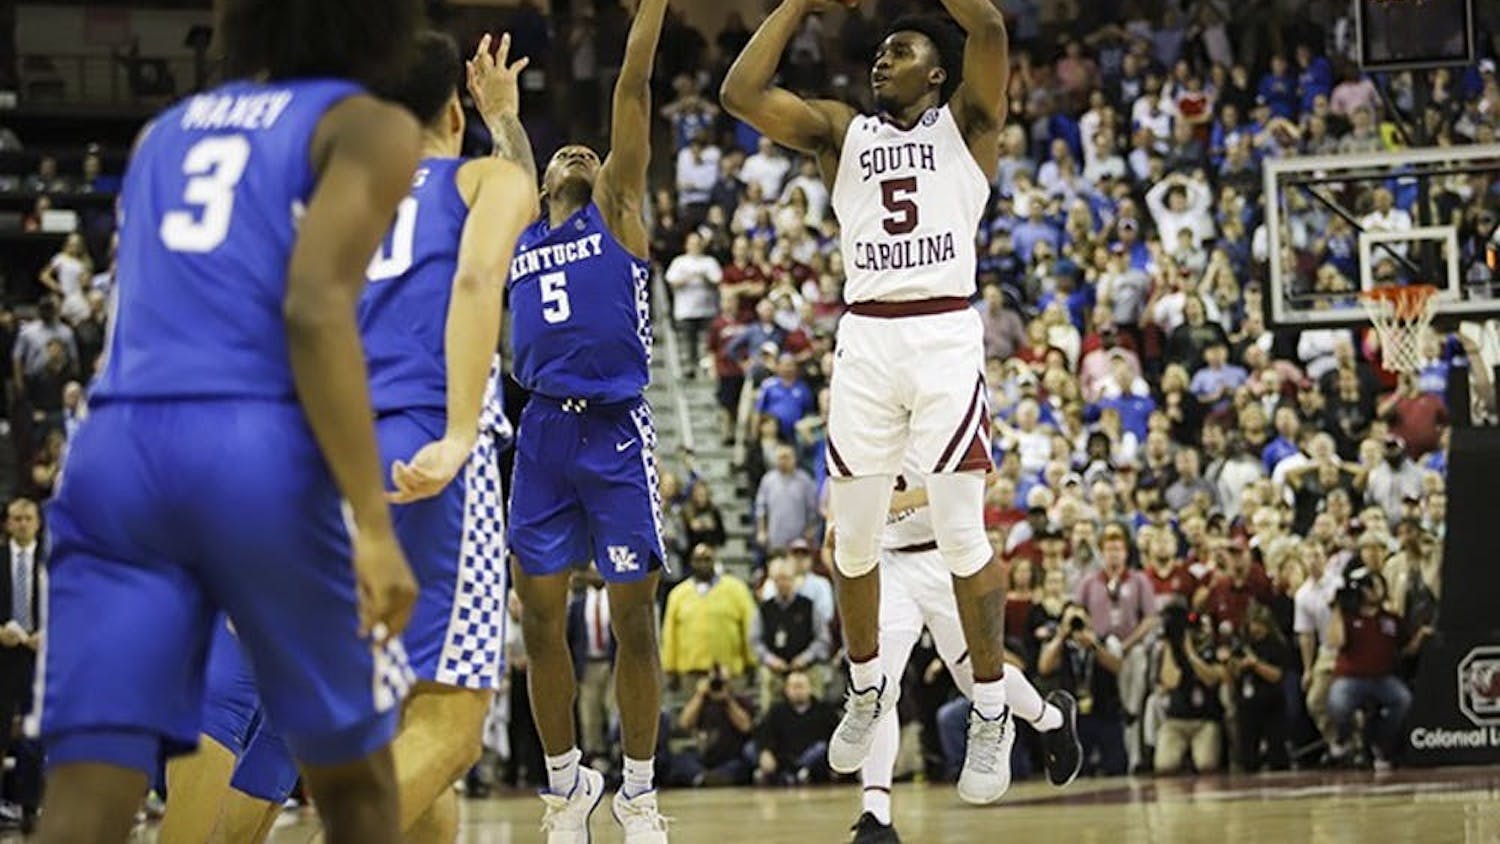 FILE—Redshirt junior guard Jermaine Couisnard shoots a buzzer beater during a game against Kentucky on Jan. 15, 2020 at Colonial Life Arena in Columbia, SC. The Gamecocks beat the Wildcats, 81-78.